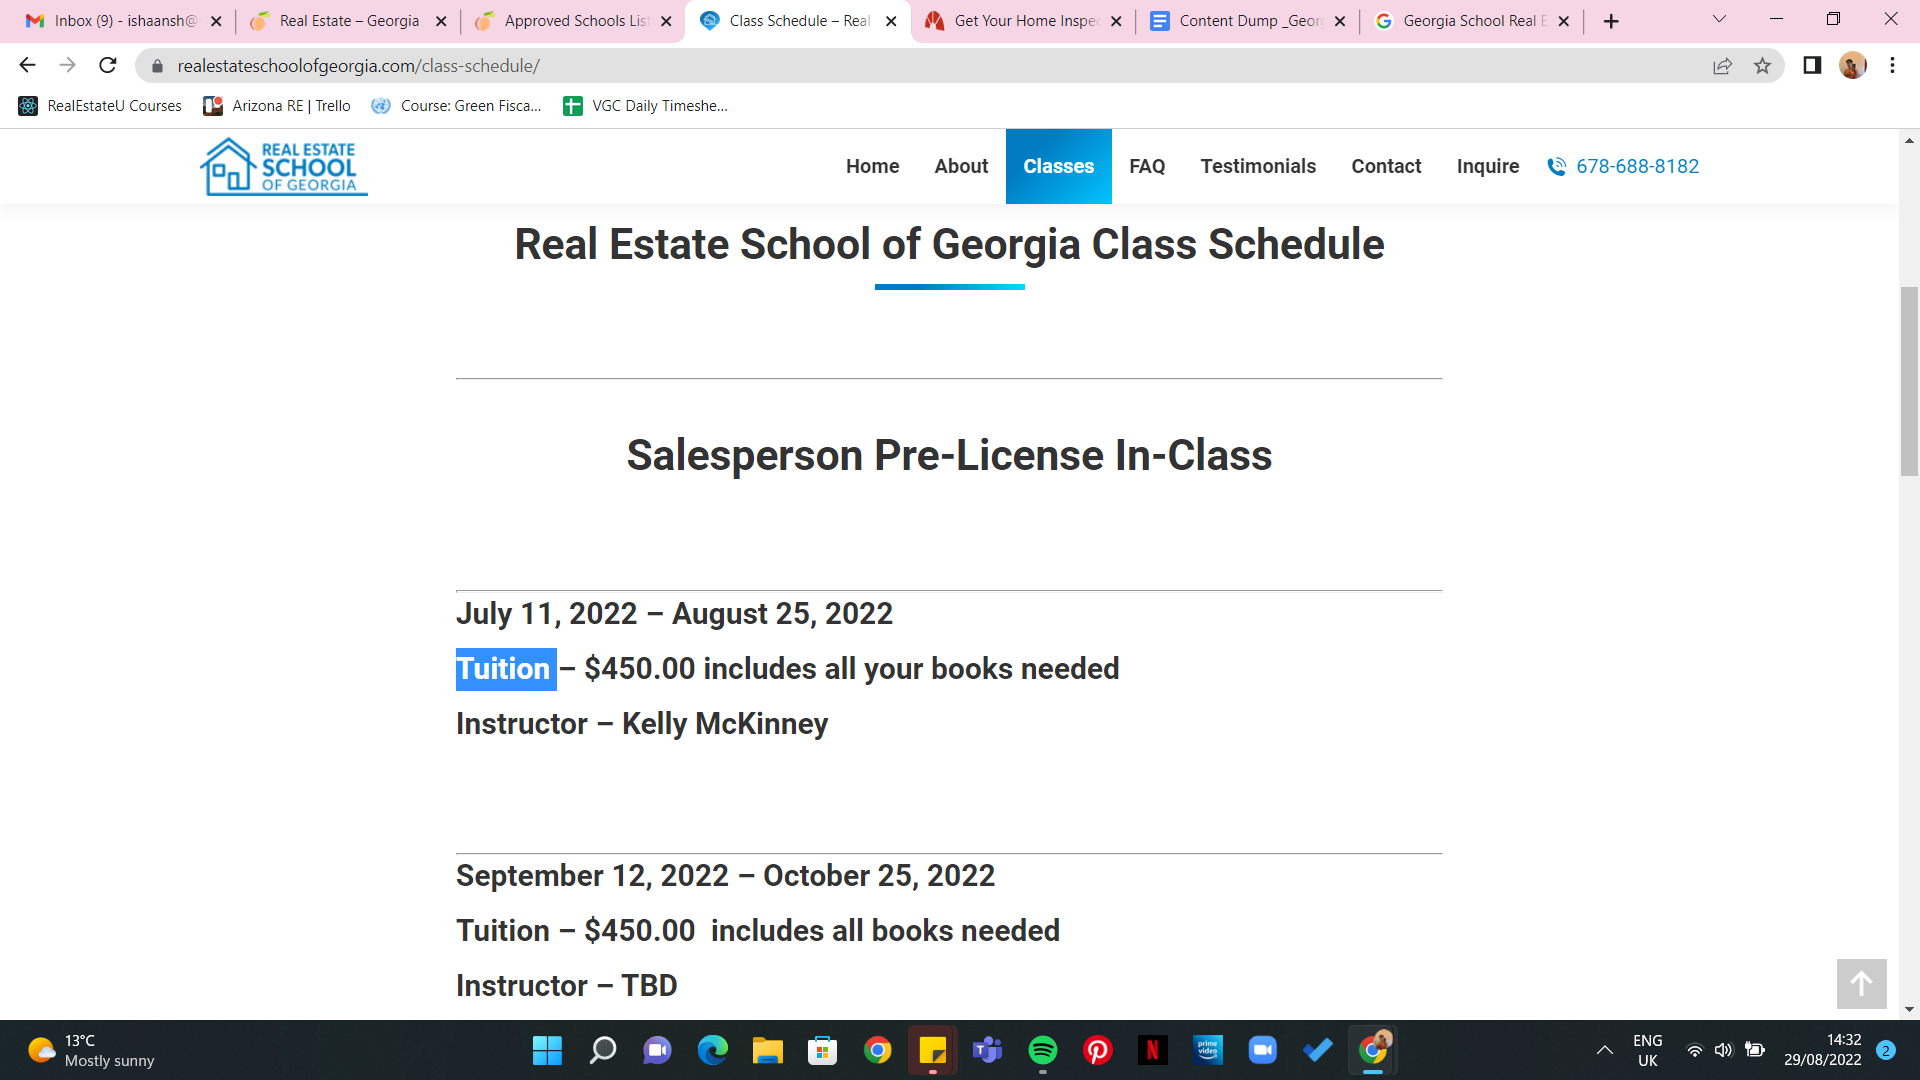 Advertisement for the Salesperson Prelicense In-Class course from Real Estate School of Georgia.